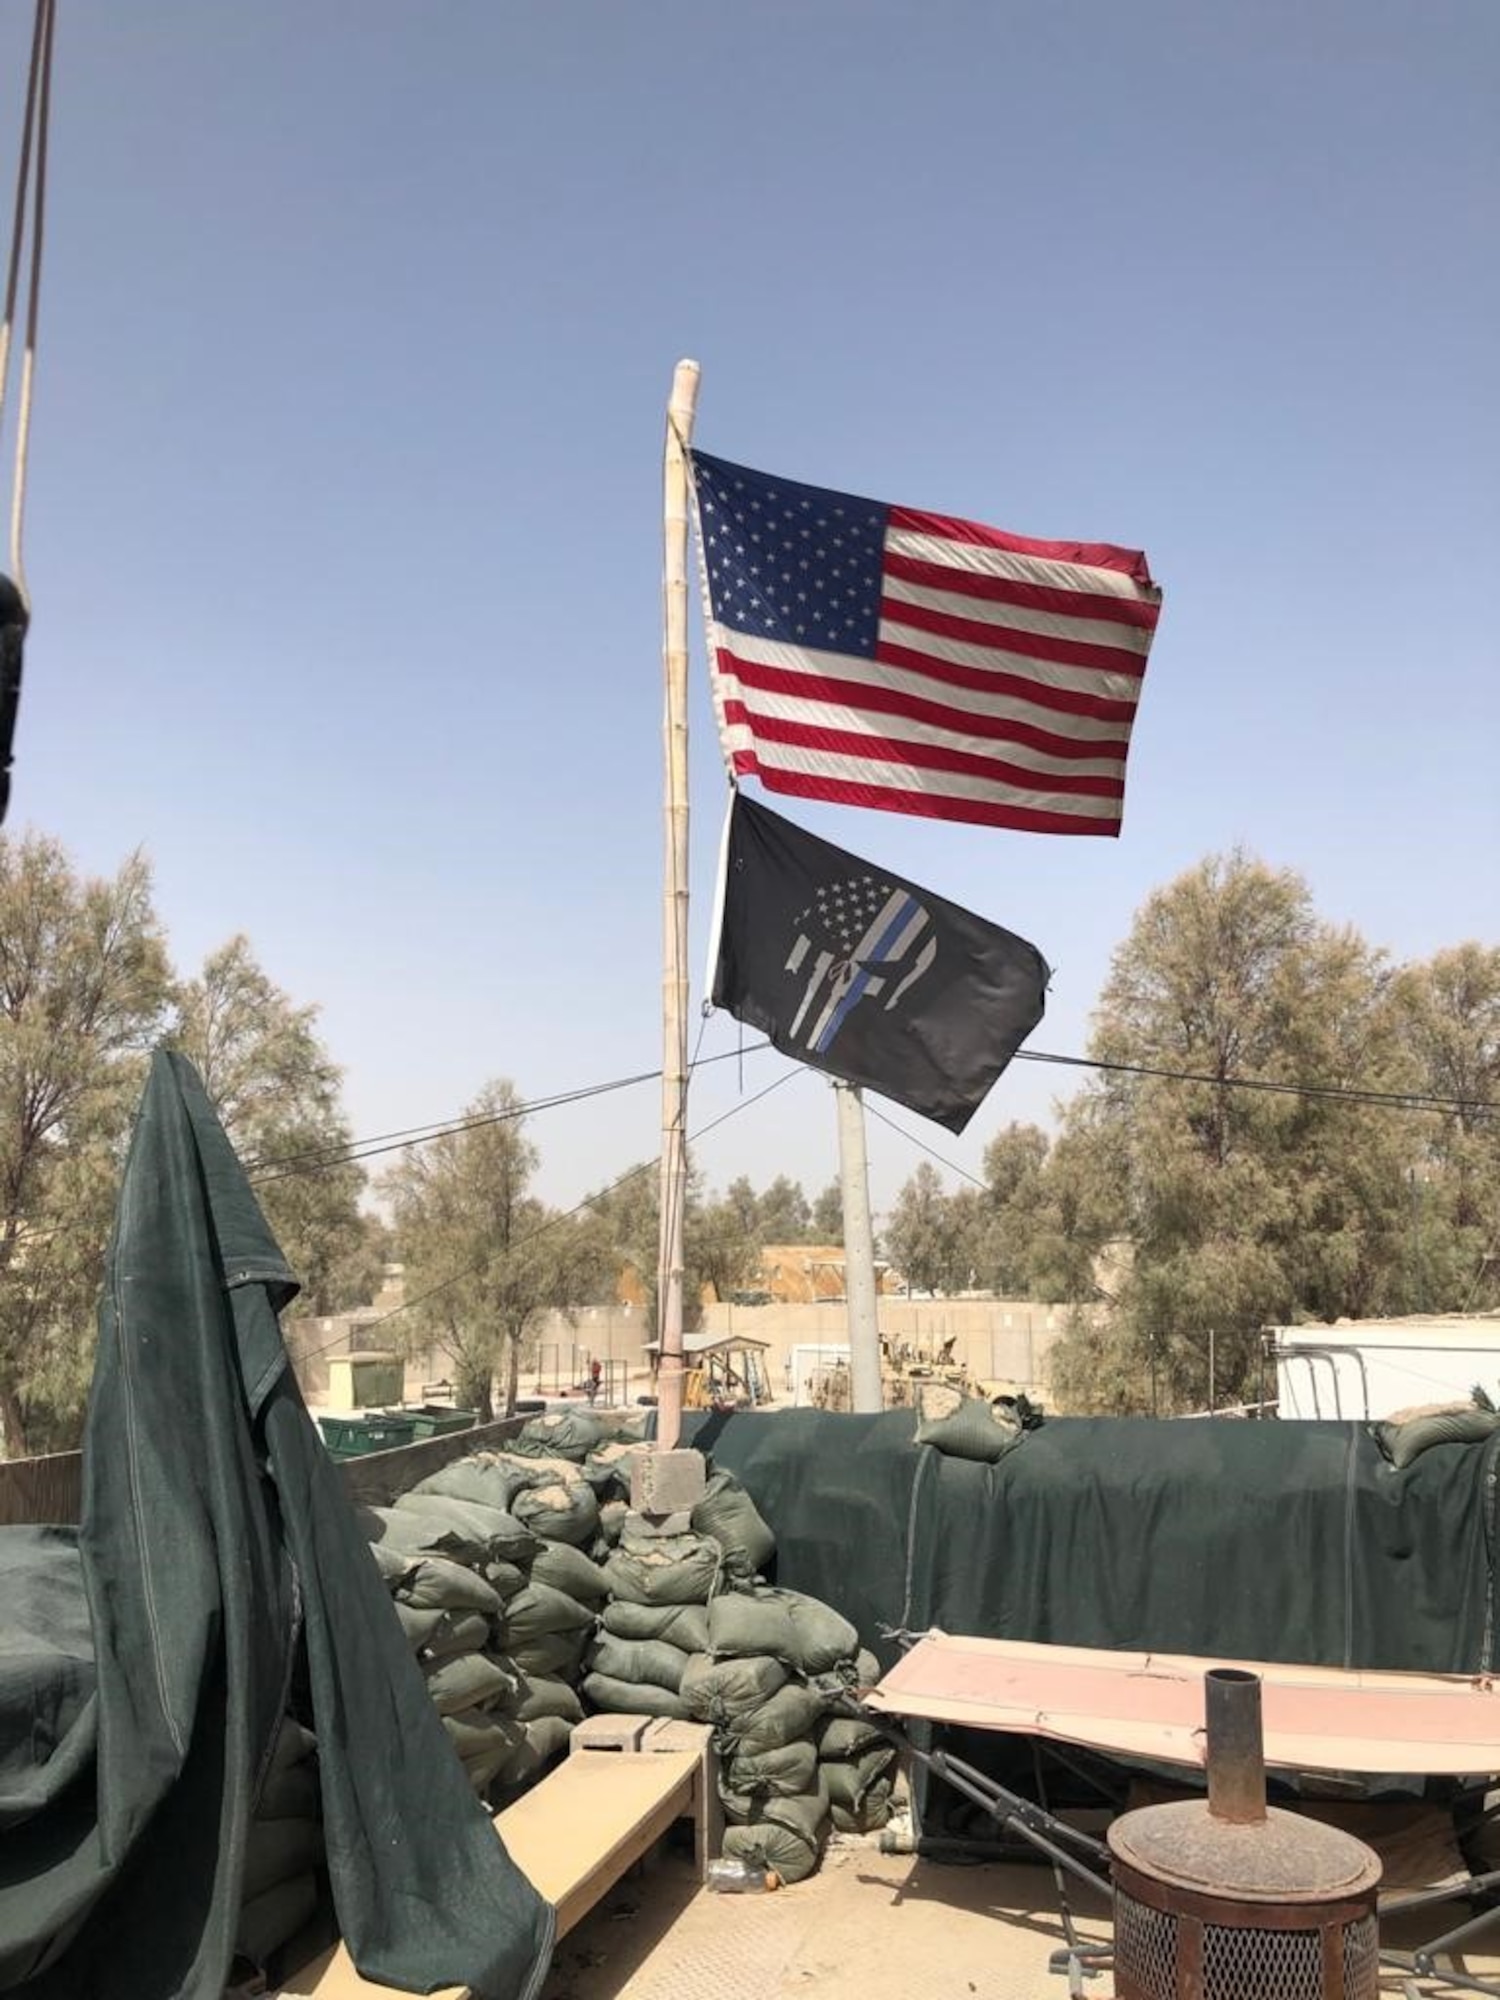 The OSI Expeditionary Detachment 2413, Task Force Black, "Lucky 13" flag waves with Old Glory prior to the unit's End of Mission Oct. 28, 2020. (Photo by SA Carl Hanauer)